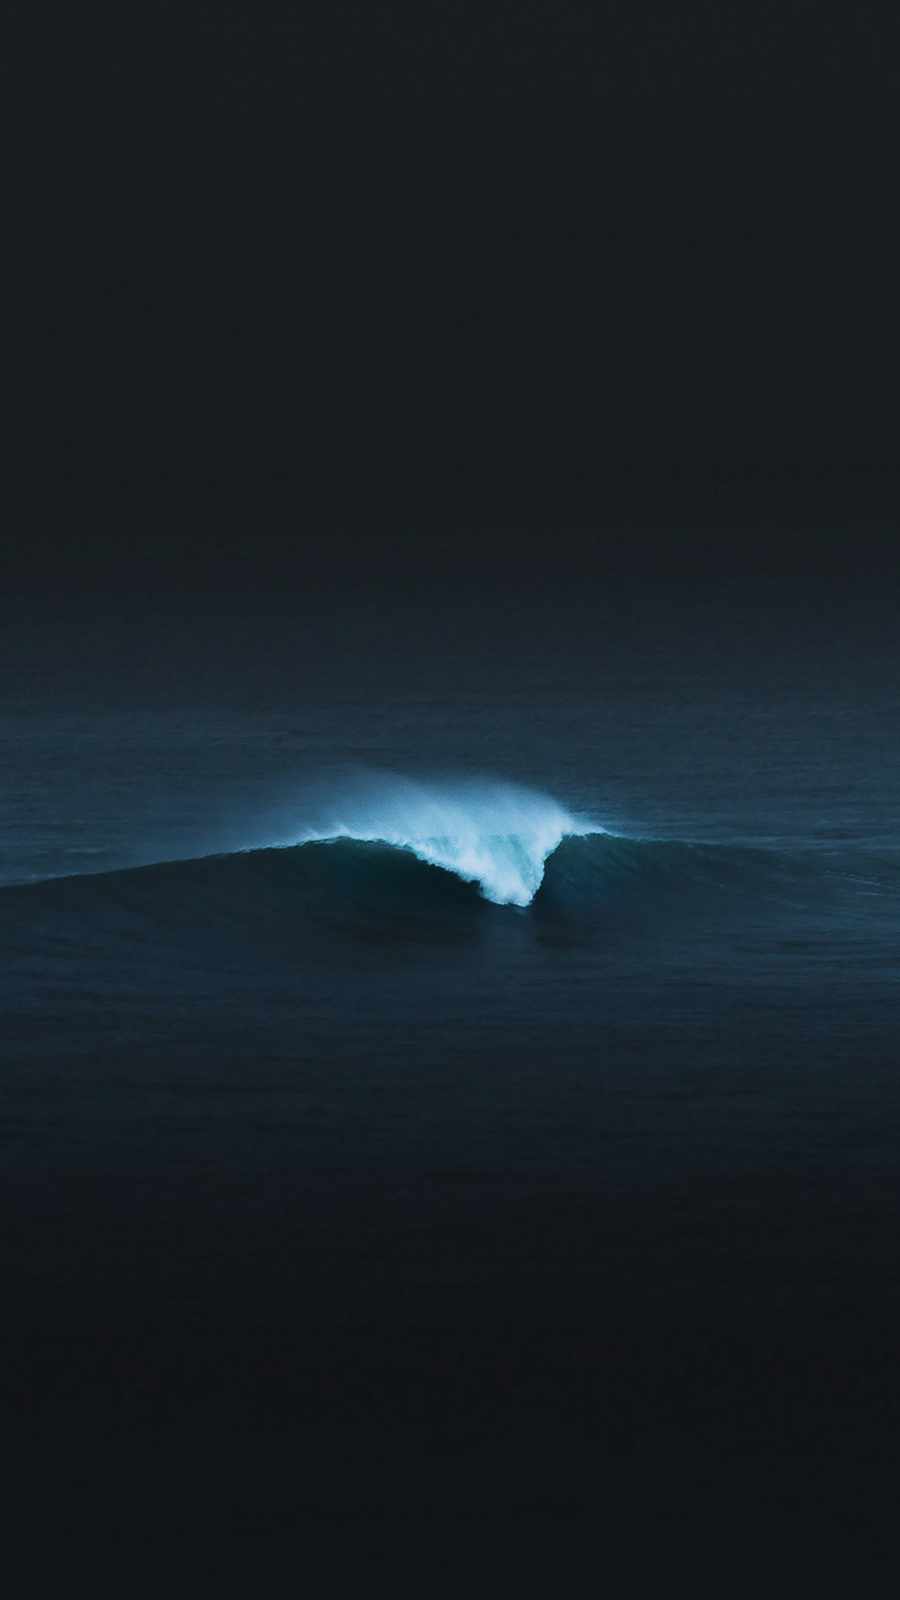 Iphone Wave Wallpapers